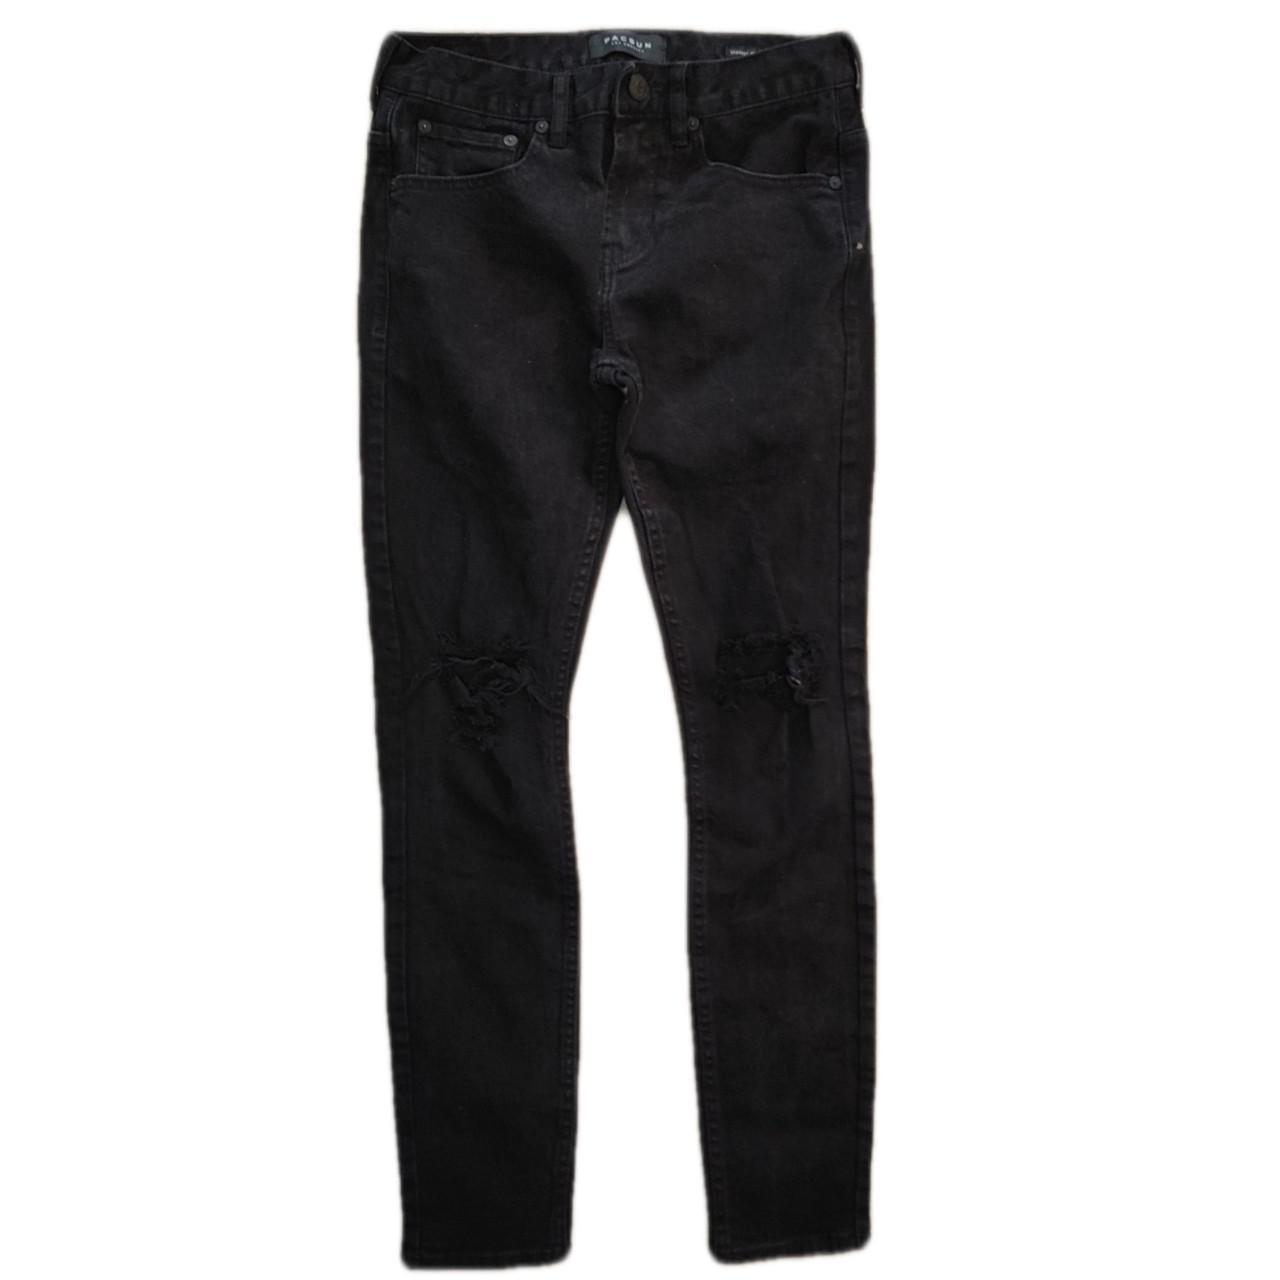 Product Image 2 - Pacsun Skinny Jeans Size 29"